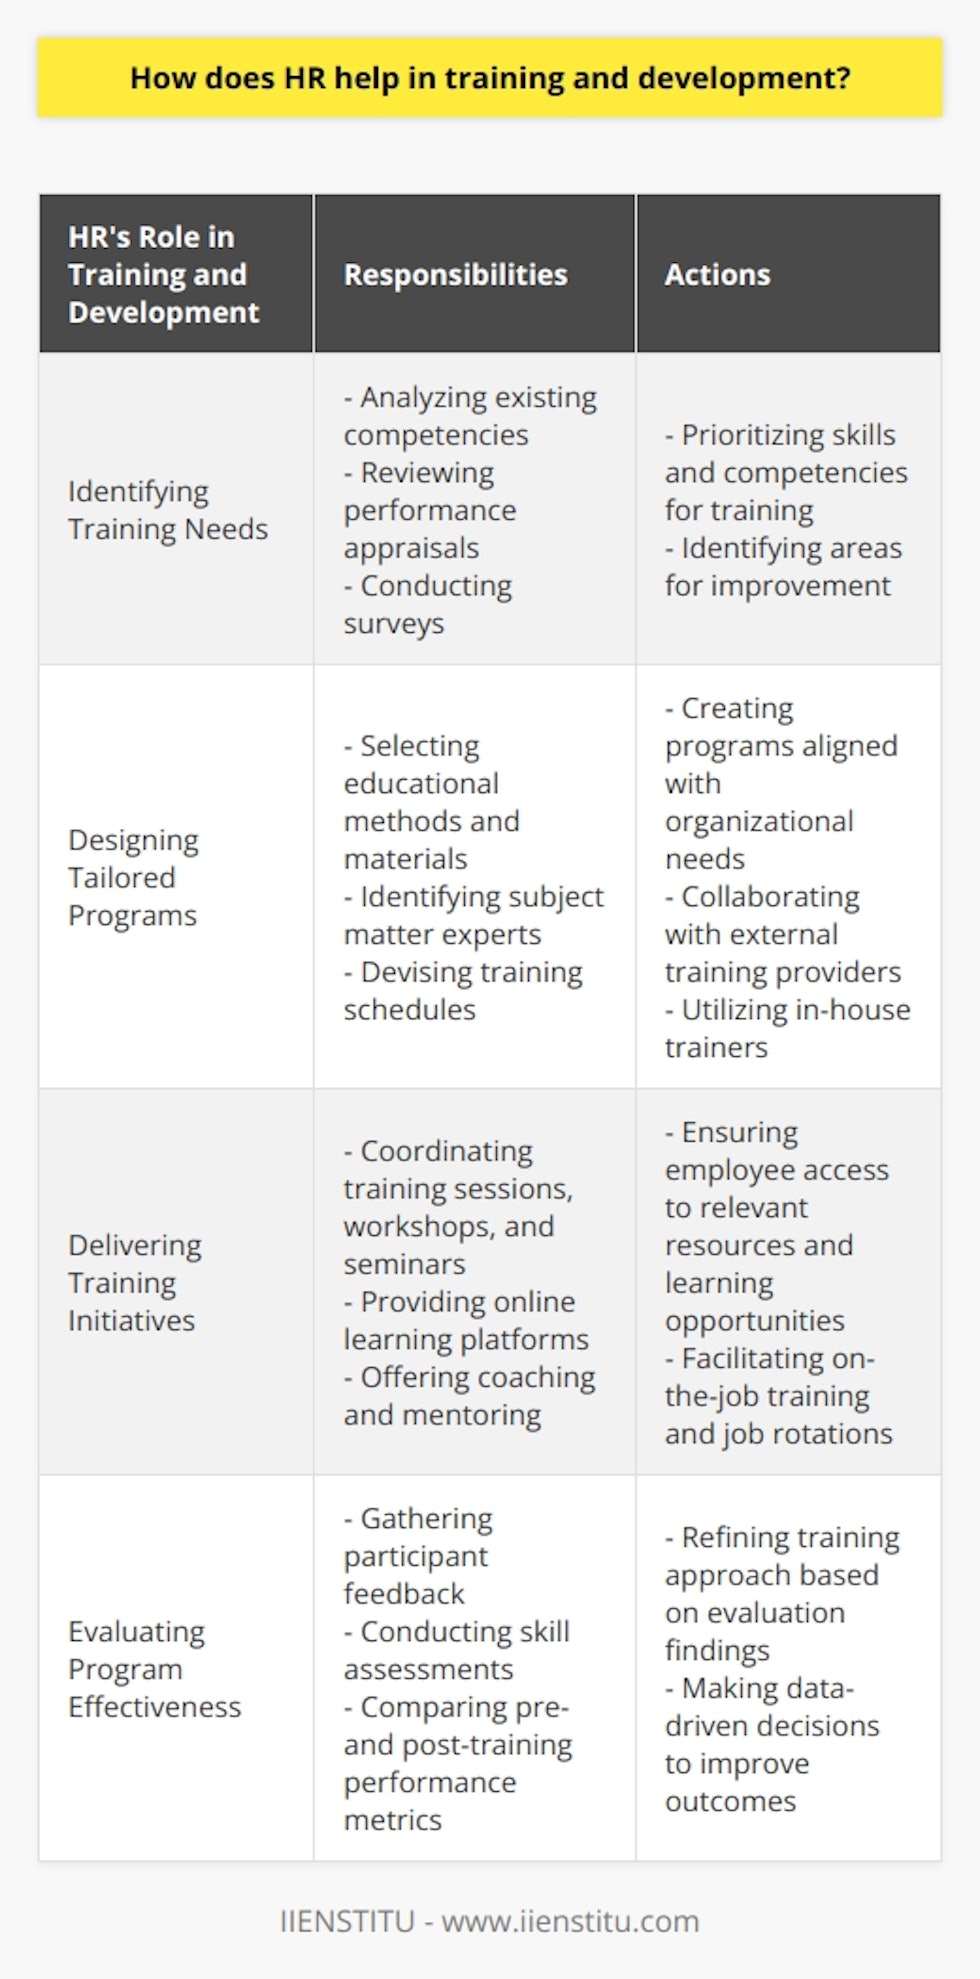 The role of HR in training and development is essential for the growth and success of an organization. HR professionals contribute by identifying training needs, designing programs, delivering initiatives, and evaluating their effectiveness.One of the main functions of HR in training and development is to assess the skill gaps and training requirements of employees. This involves analyzing existing competencies, reviewing performance appraisals, and conducting surveys to gather feedback. By identifying these needs, HR professionals can prioritize which skills and competencies should be addressed through training interventions.After identifying training needs, HR professionals design tailored programs to address these areas. They select appropriate educational methods and materials, identify subject matter experts, and devise training schedules. To ensure that the training programs are aligned with the organization's needs, HR teams often collaborate with external training providers or utilize in-house trainers.HR departments are responsible for delivering training initiatives, ensuring that employees have access to relevant resources and learning opportunities. This includes coordinating training sessions, workshops, and seminars, as well as providing online learning platforms and offering ongoing coaching and mentoring. To enhance employees' understanding of different roles and responsibilities, HR professionals may also facilitate on-the-job training, job rotations, and cross-functional projects.To maximize the benefits of training and development, HR must evaluate the effectiveness of these programs. This enables HR professionals to refine their training approach and ensure that employees receive high-quality instruction. Evaluation methods may include gathering participant feedback, conducting skill assessments, and comparing pre- and post-training performance metrics. These findings help HR make data-driven decisions to improve overall training outcomes.In conclusion, HR plays a vital role in the training and development of employees. By identifying training needs, designing tailored programs, delivering initiatives, and evaluating their effectiveness, HR professionals contribute to the long-term success of an organization and its workforce. Their efforts foster a culture of continuous learning and skill development, ultimately benefiting the organization as a whole.